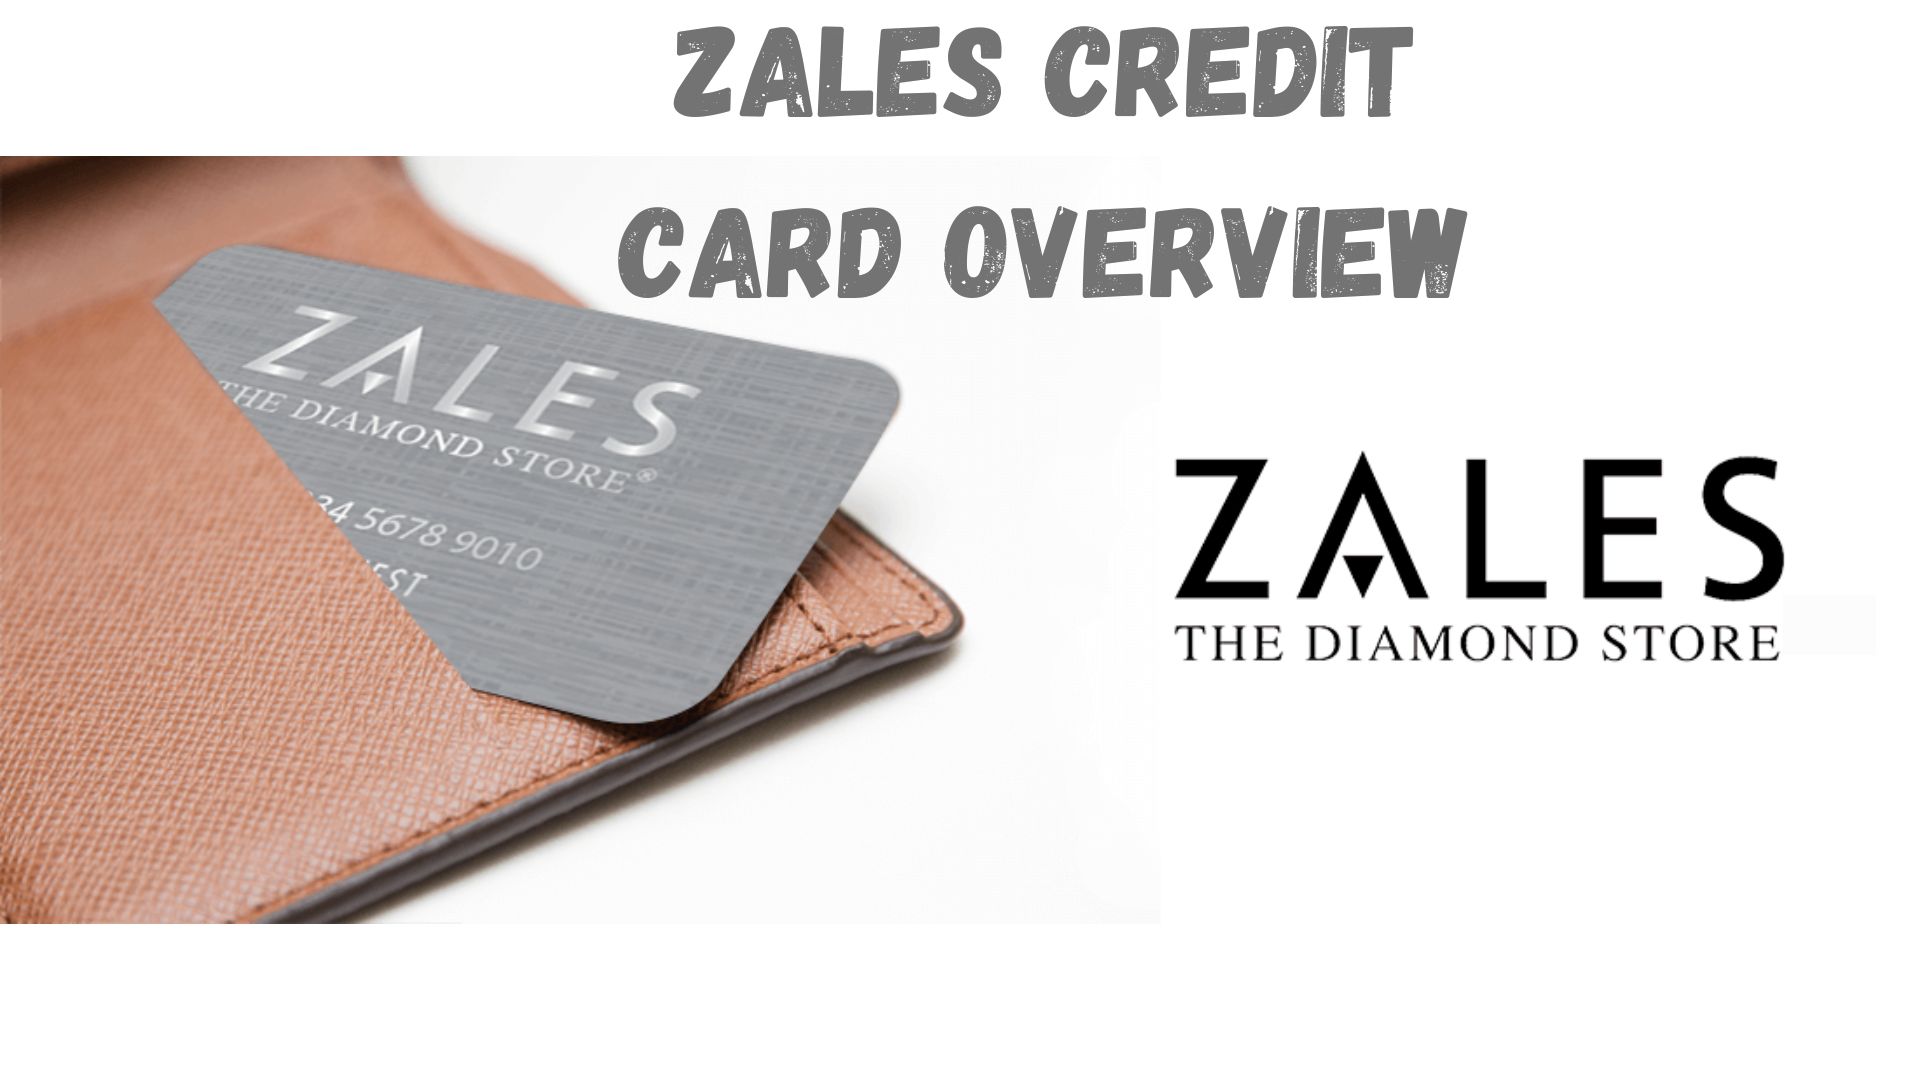 Zales Credit Card Overview